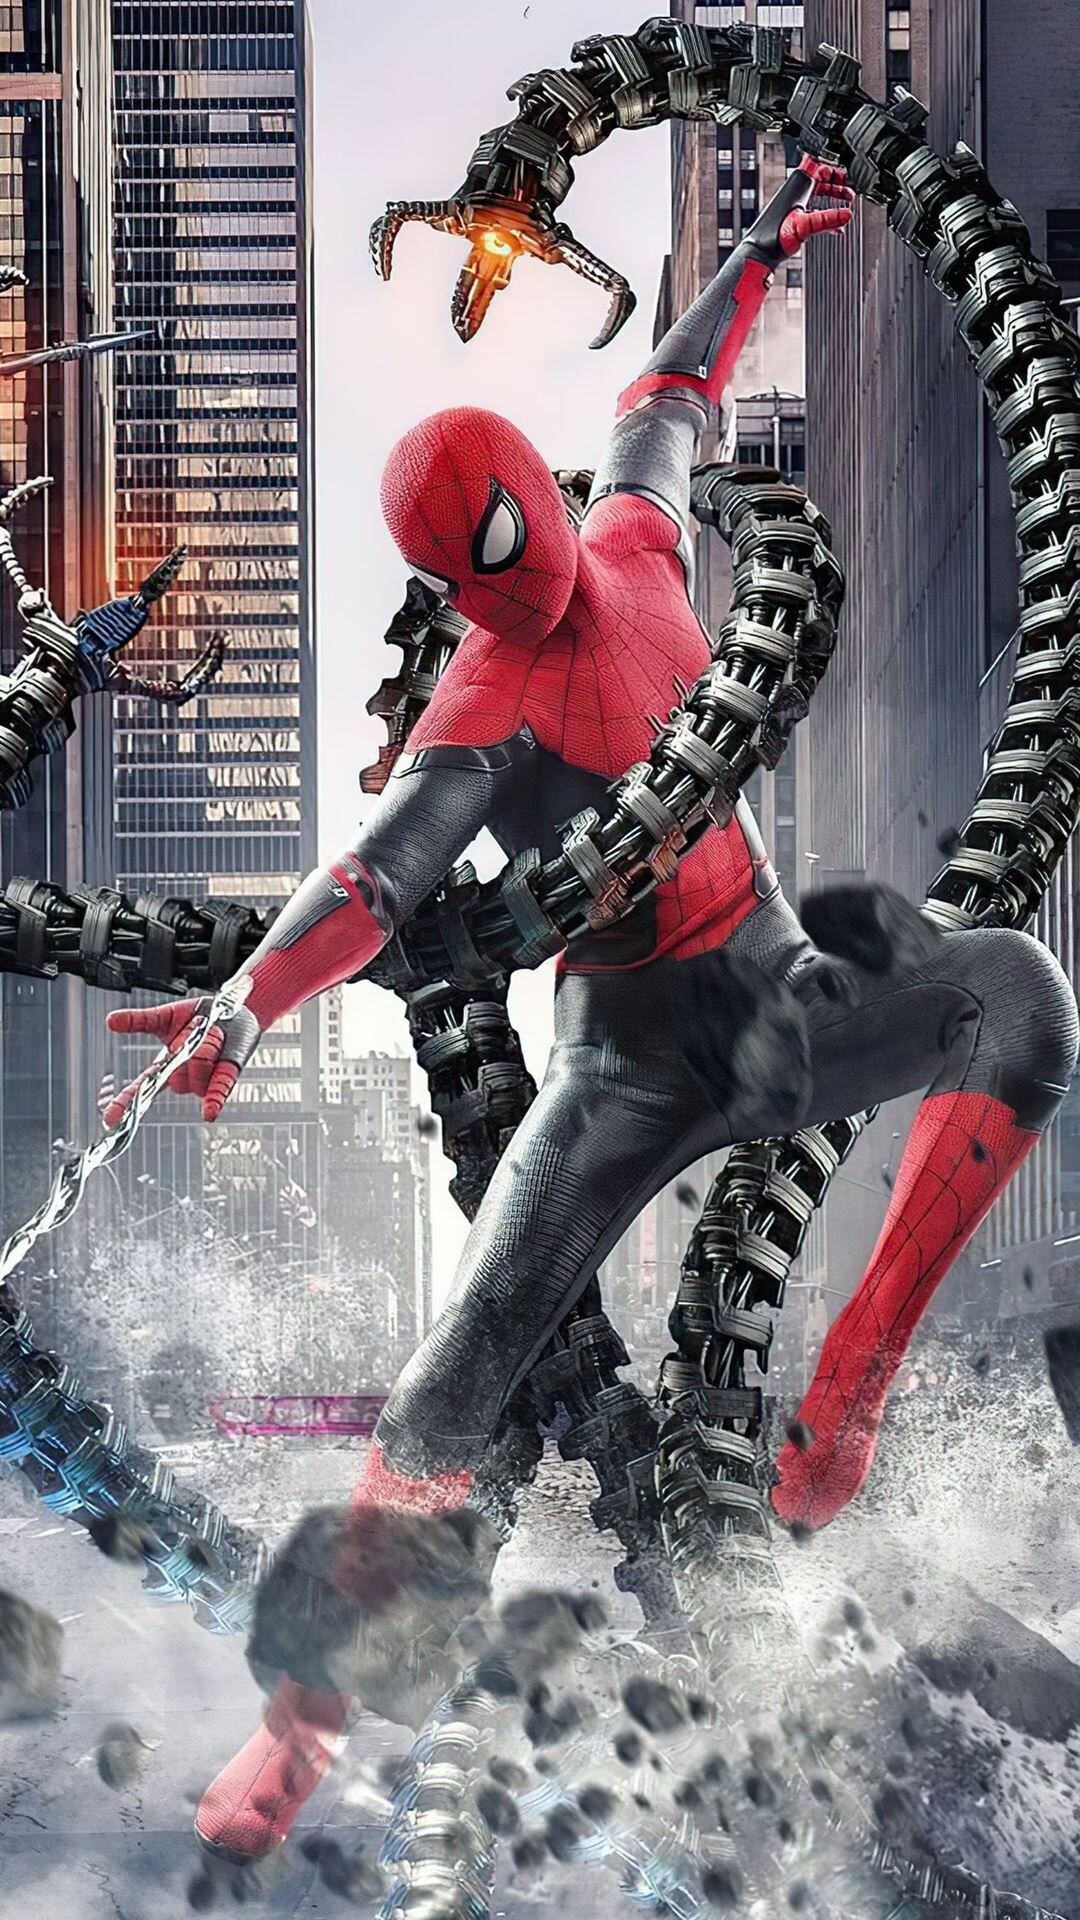 Spider-Man: No Way Home: Tom Holland, The first $1 billion-grossing movie of the pandemic at the global box office. 1080x1920 Full HD Wallpaper.